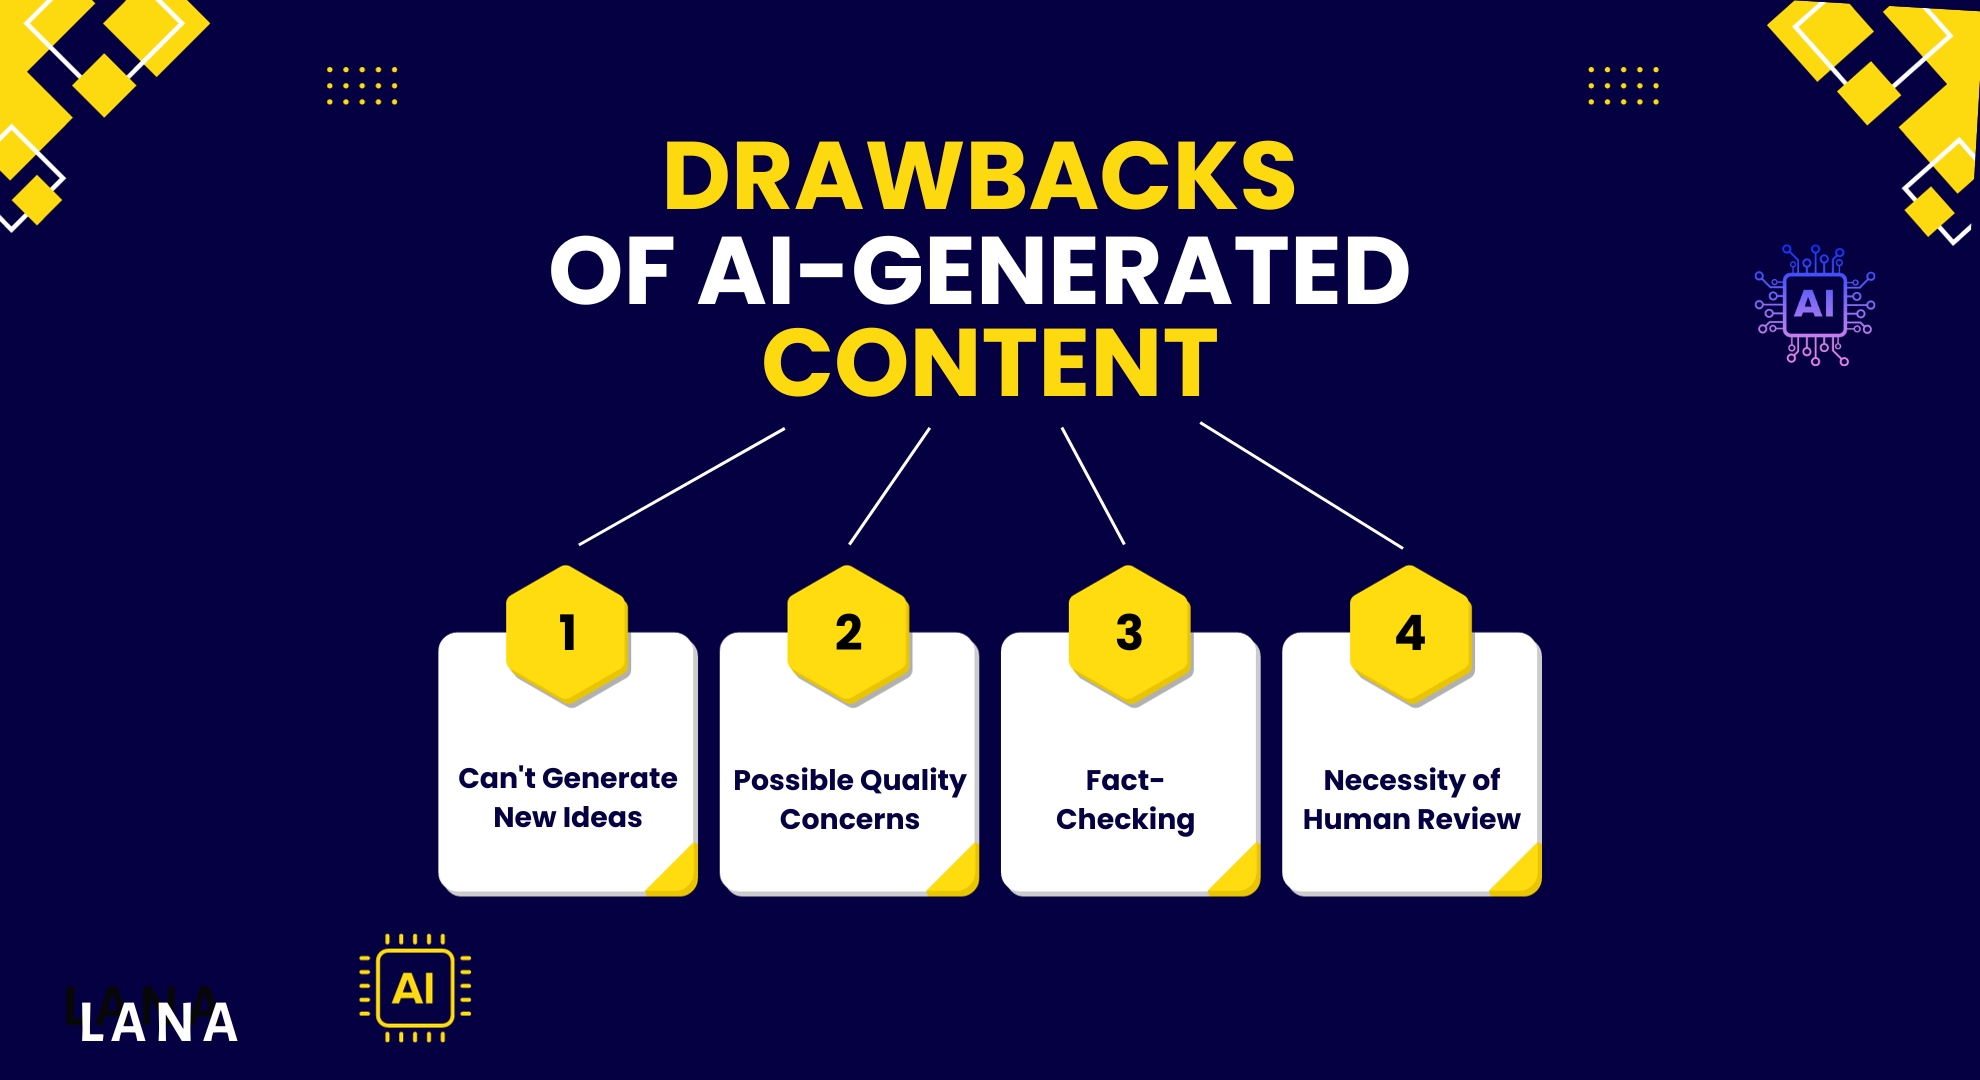 Drawbacks of AI-Generated Content